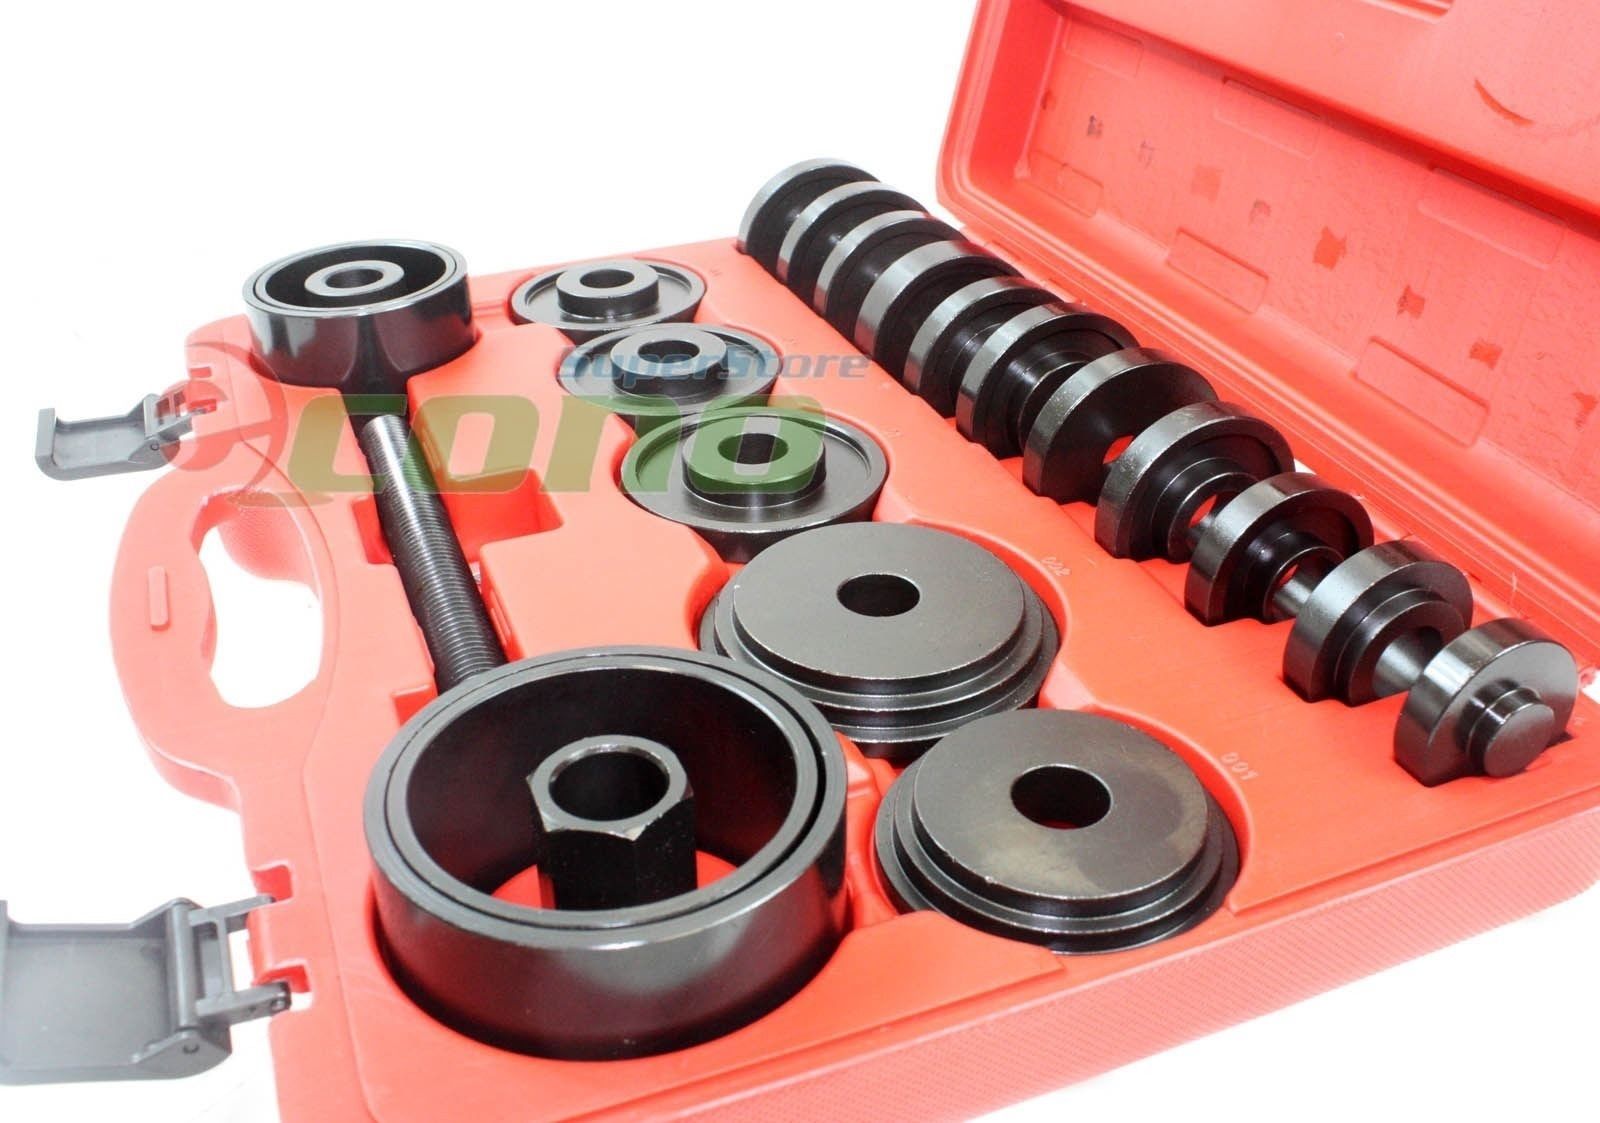 US Shipping FWD Front Wheel Drive Bearing Removal Adapter Puller Pulley Tool Kit 